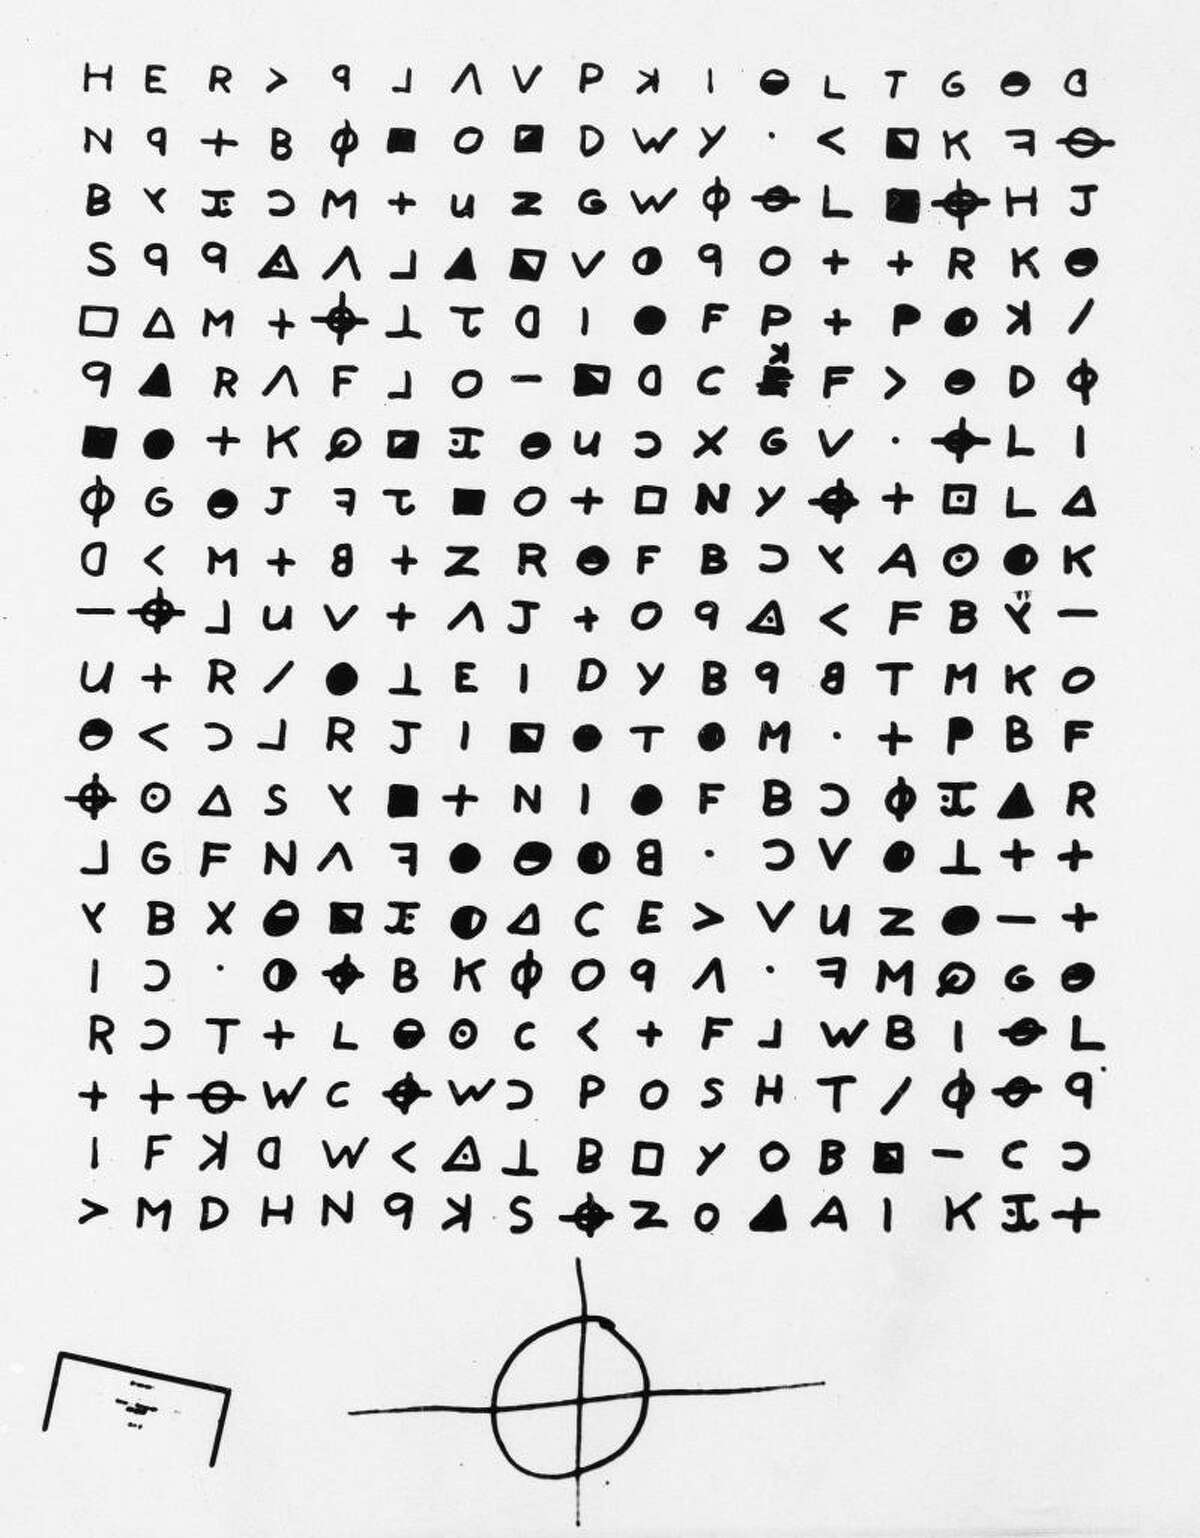 The Zodiac Killer's infamously uncrackable 340 cipher has been solved.